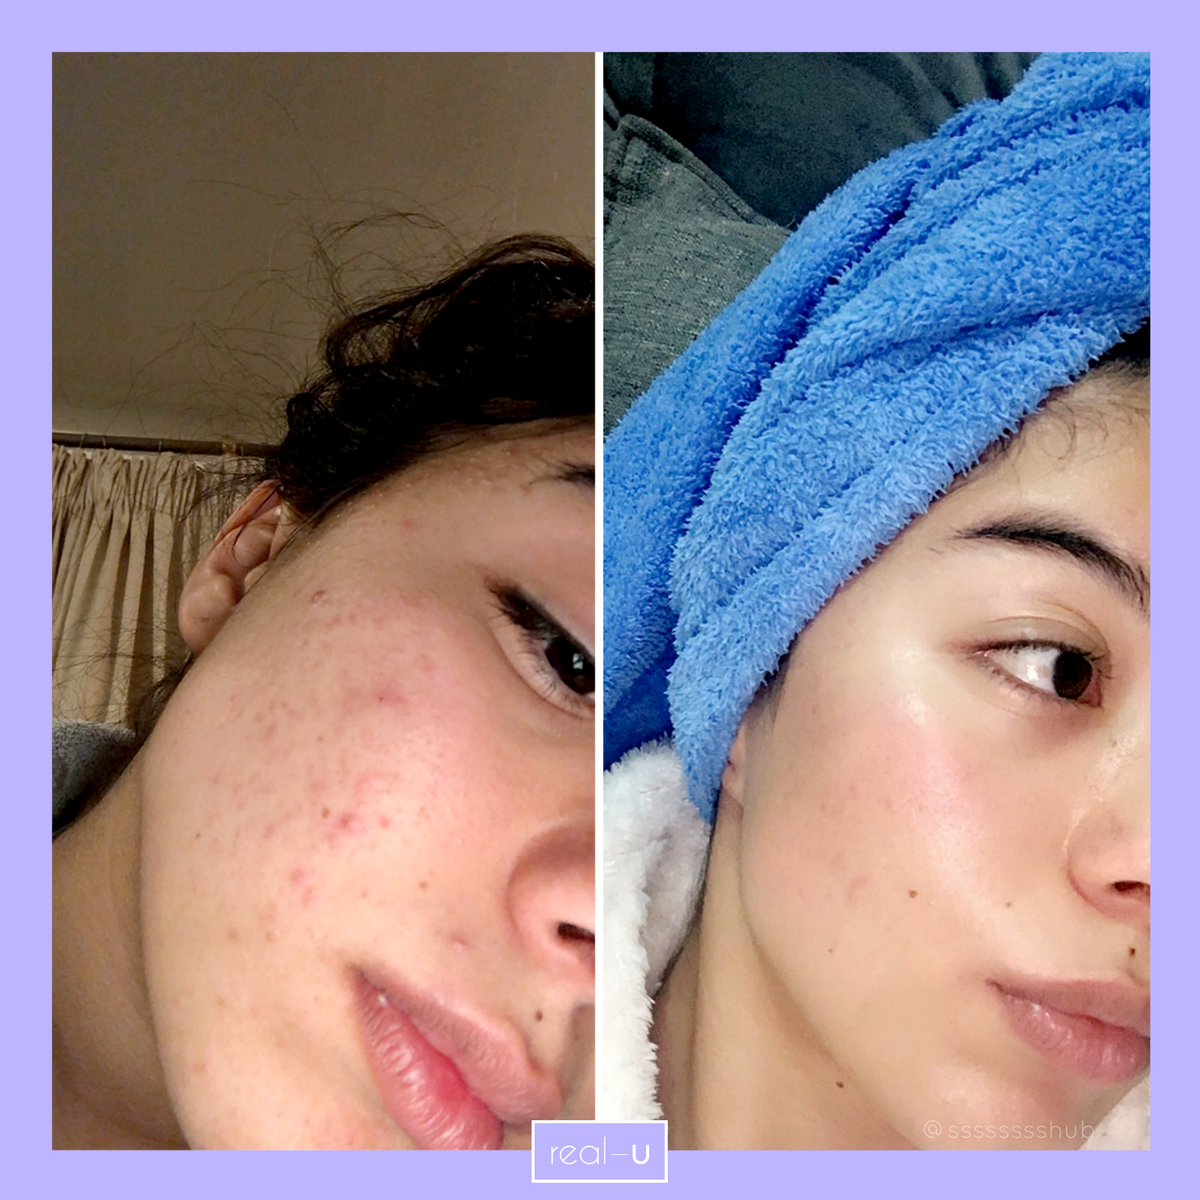 real-u acne before and after pic